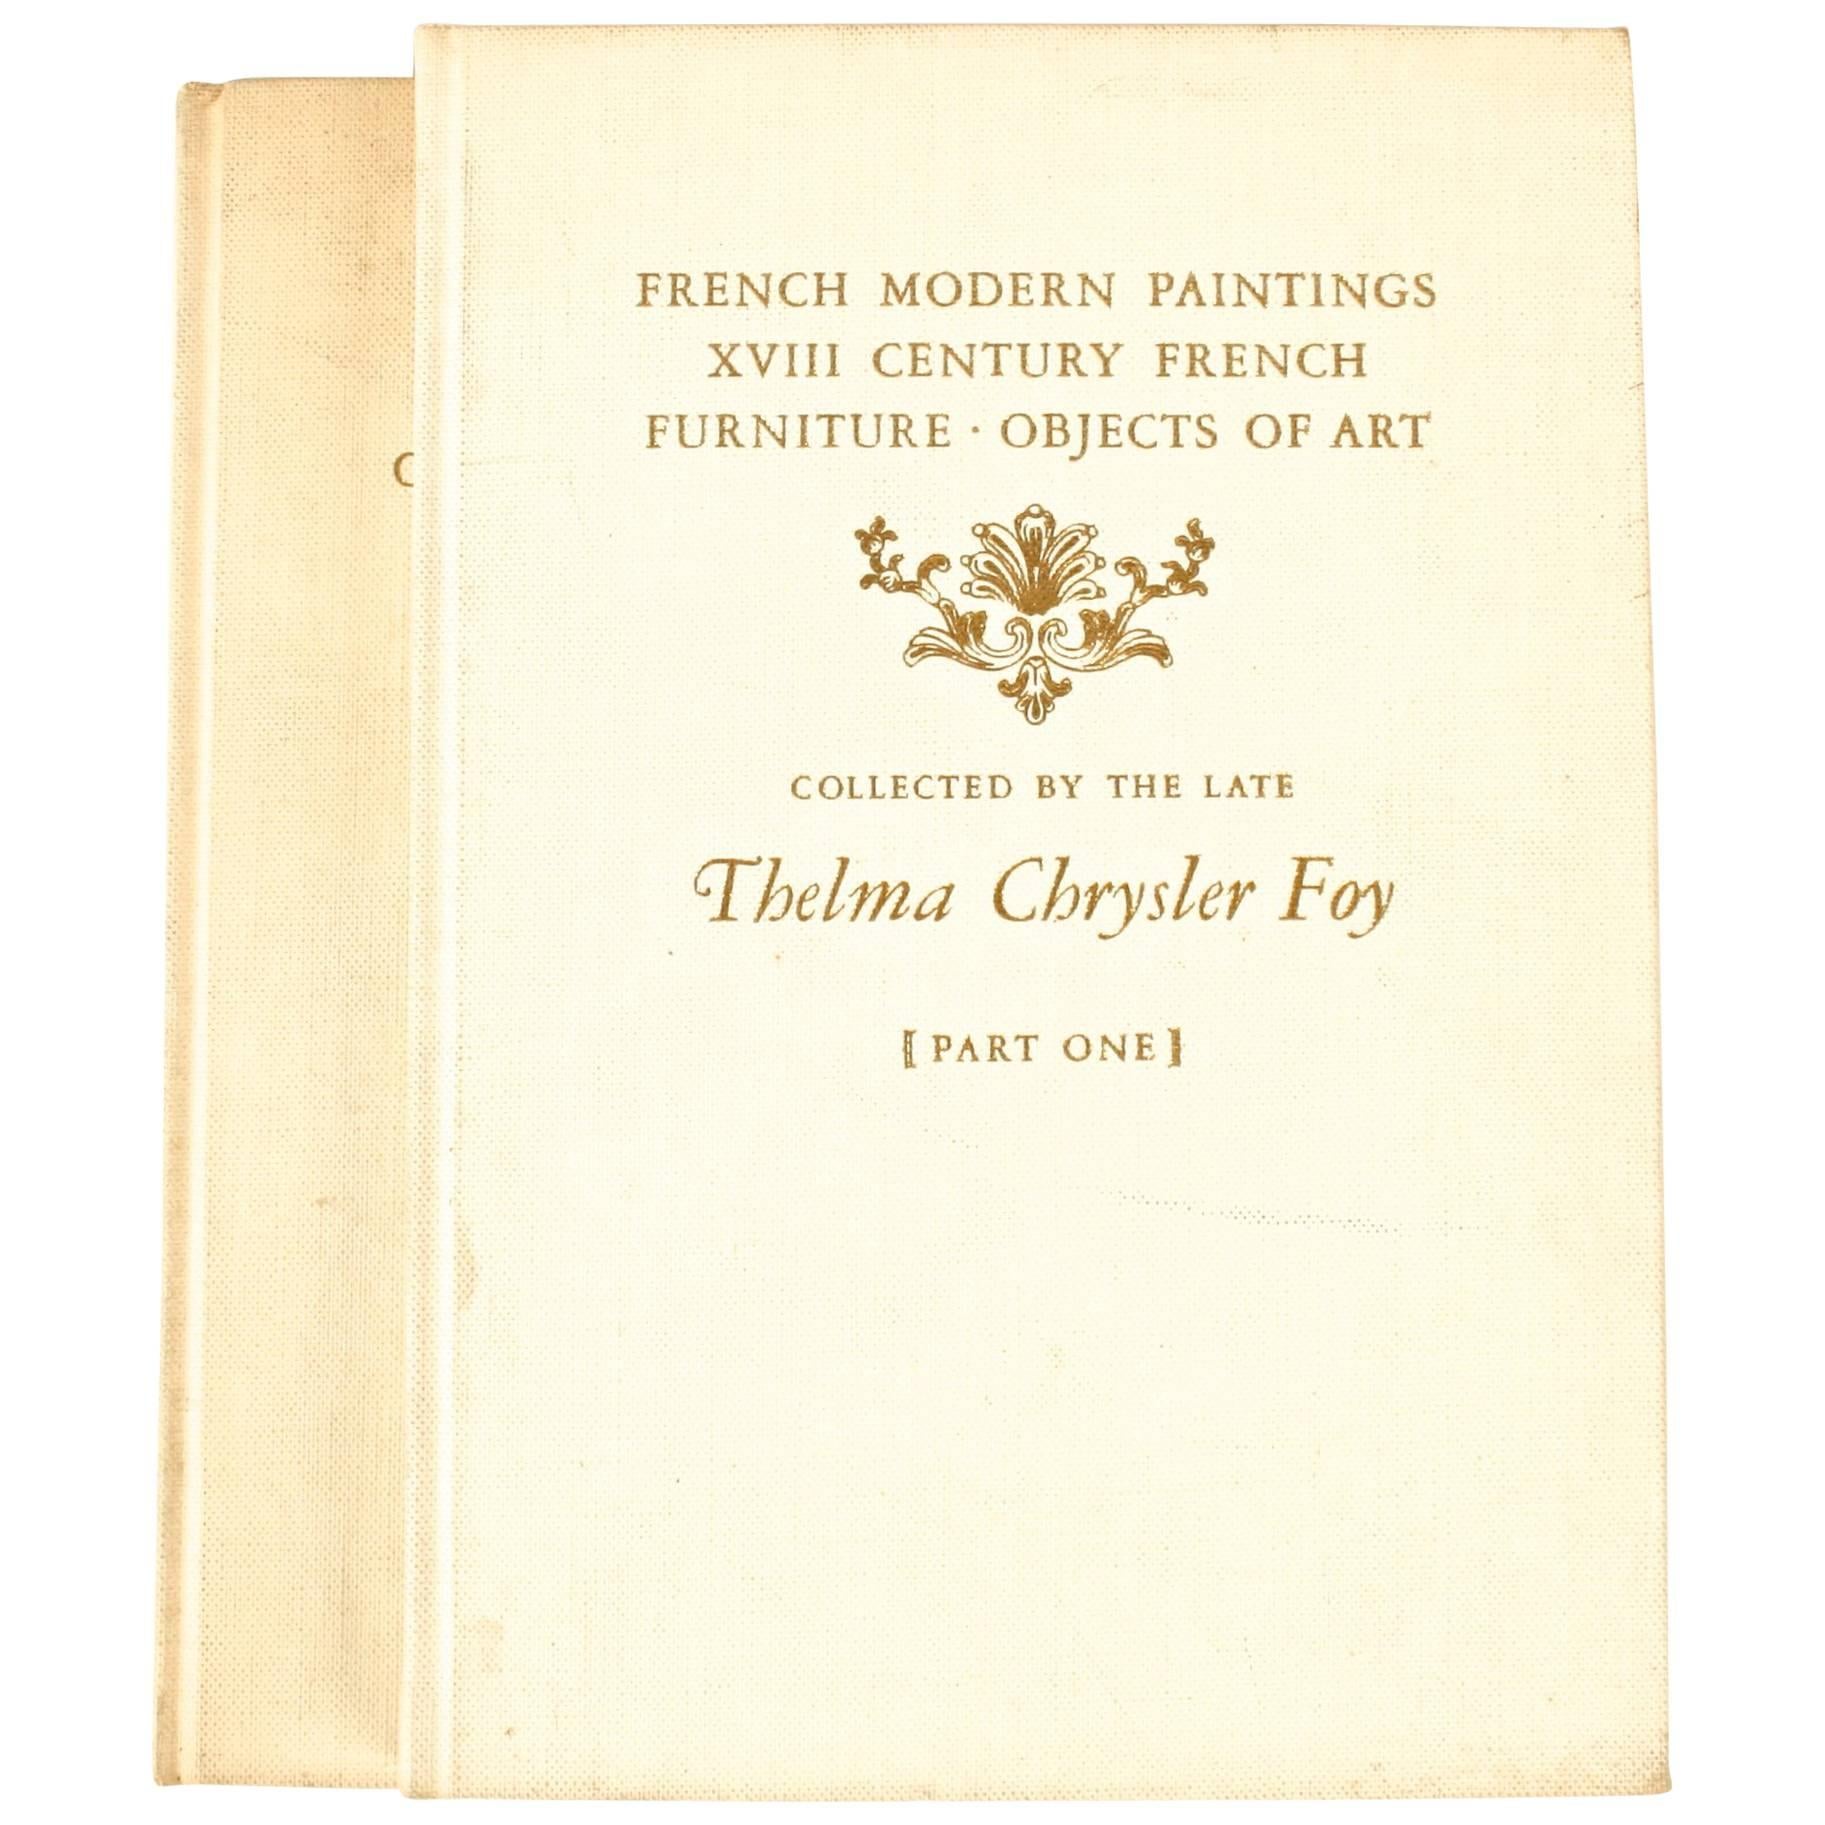 Parke-Bernet Galleries: Objects of Art Collected by the Late Thelma Chrysler Foy